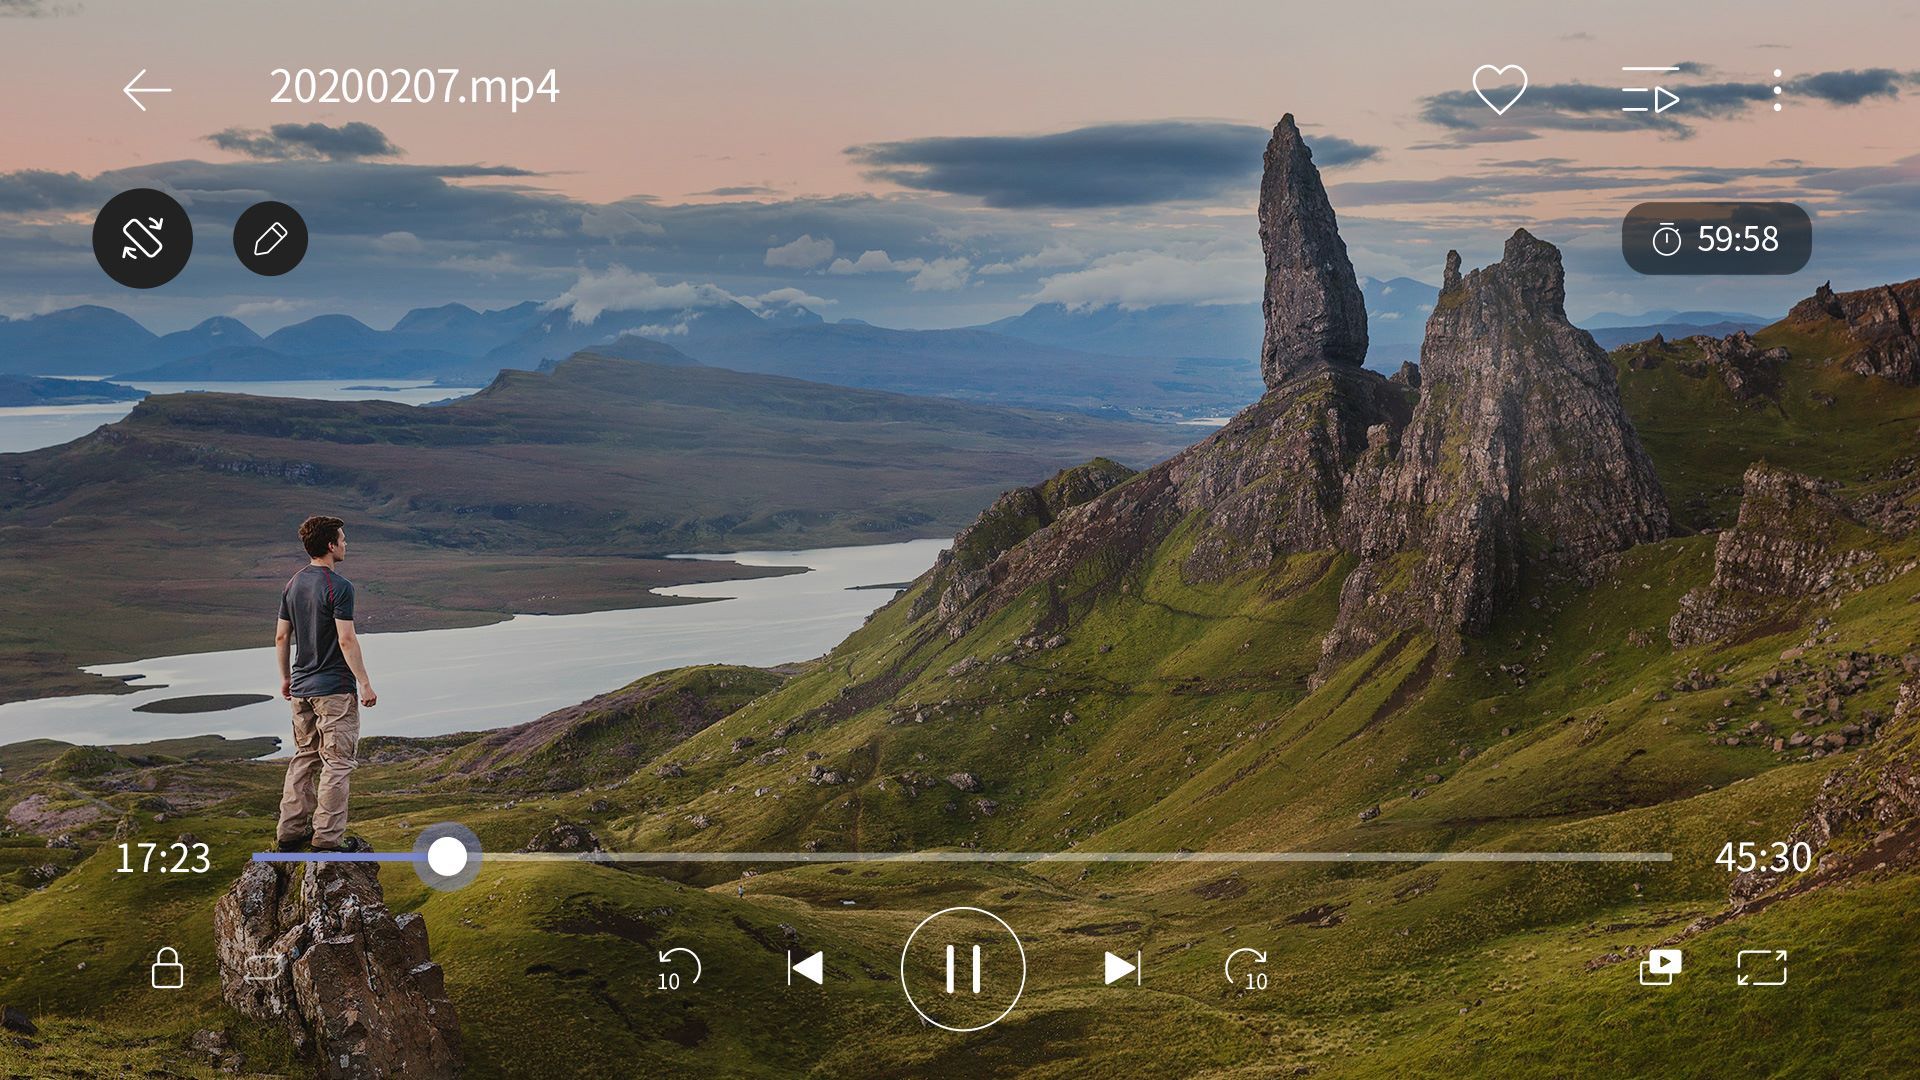 KMPlayer - All Video Player & Music Player